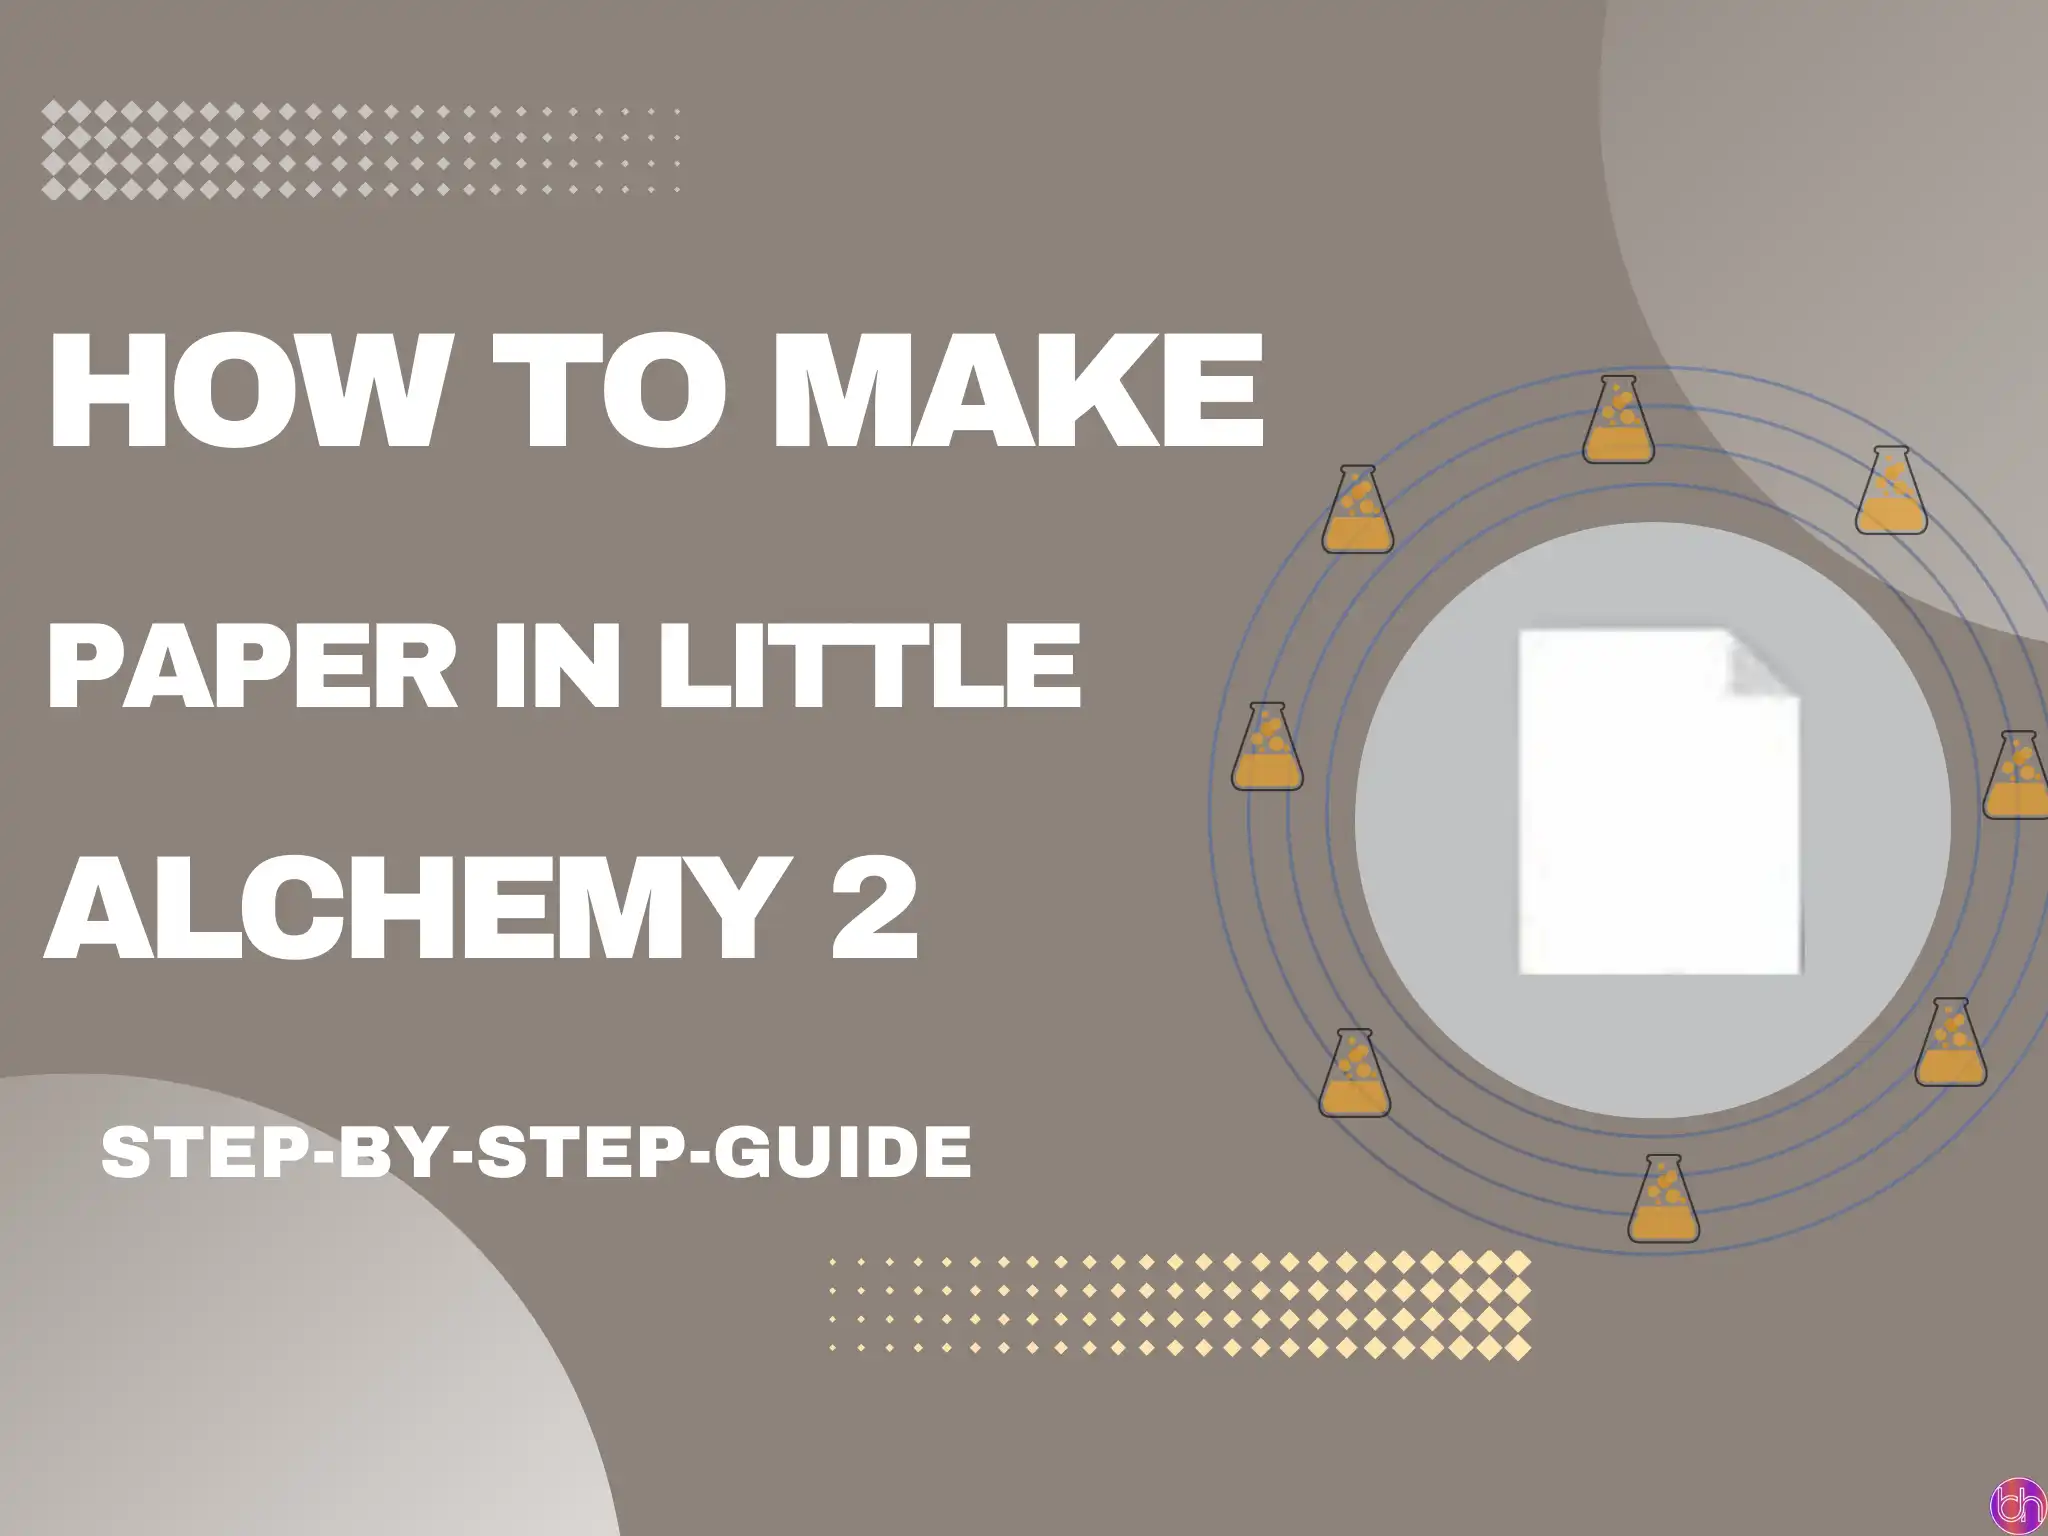 How to make Paper in Little Alchemy 2